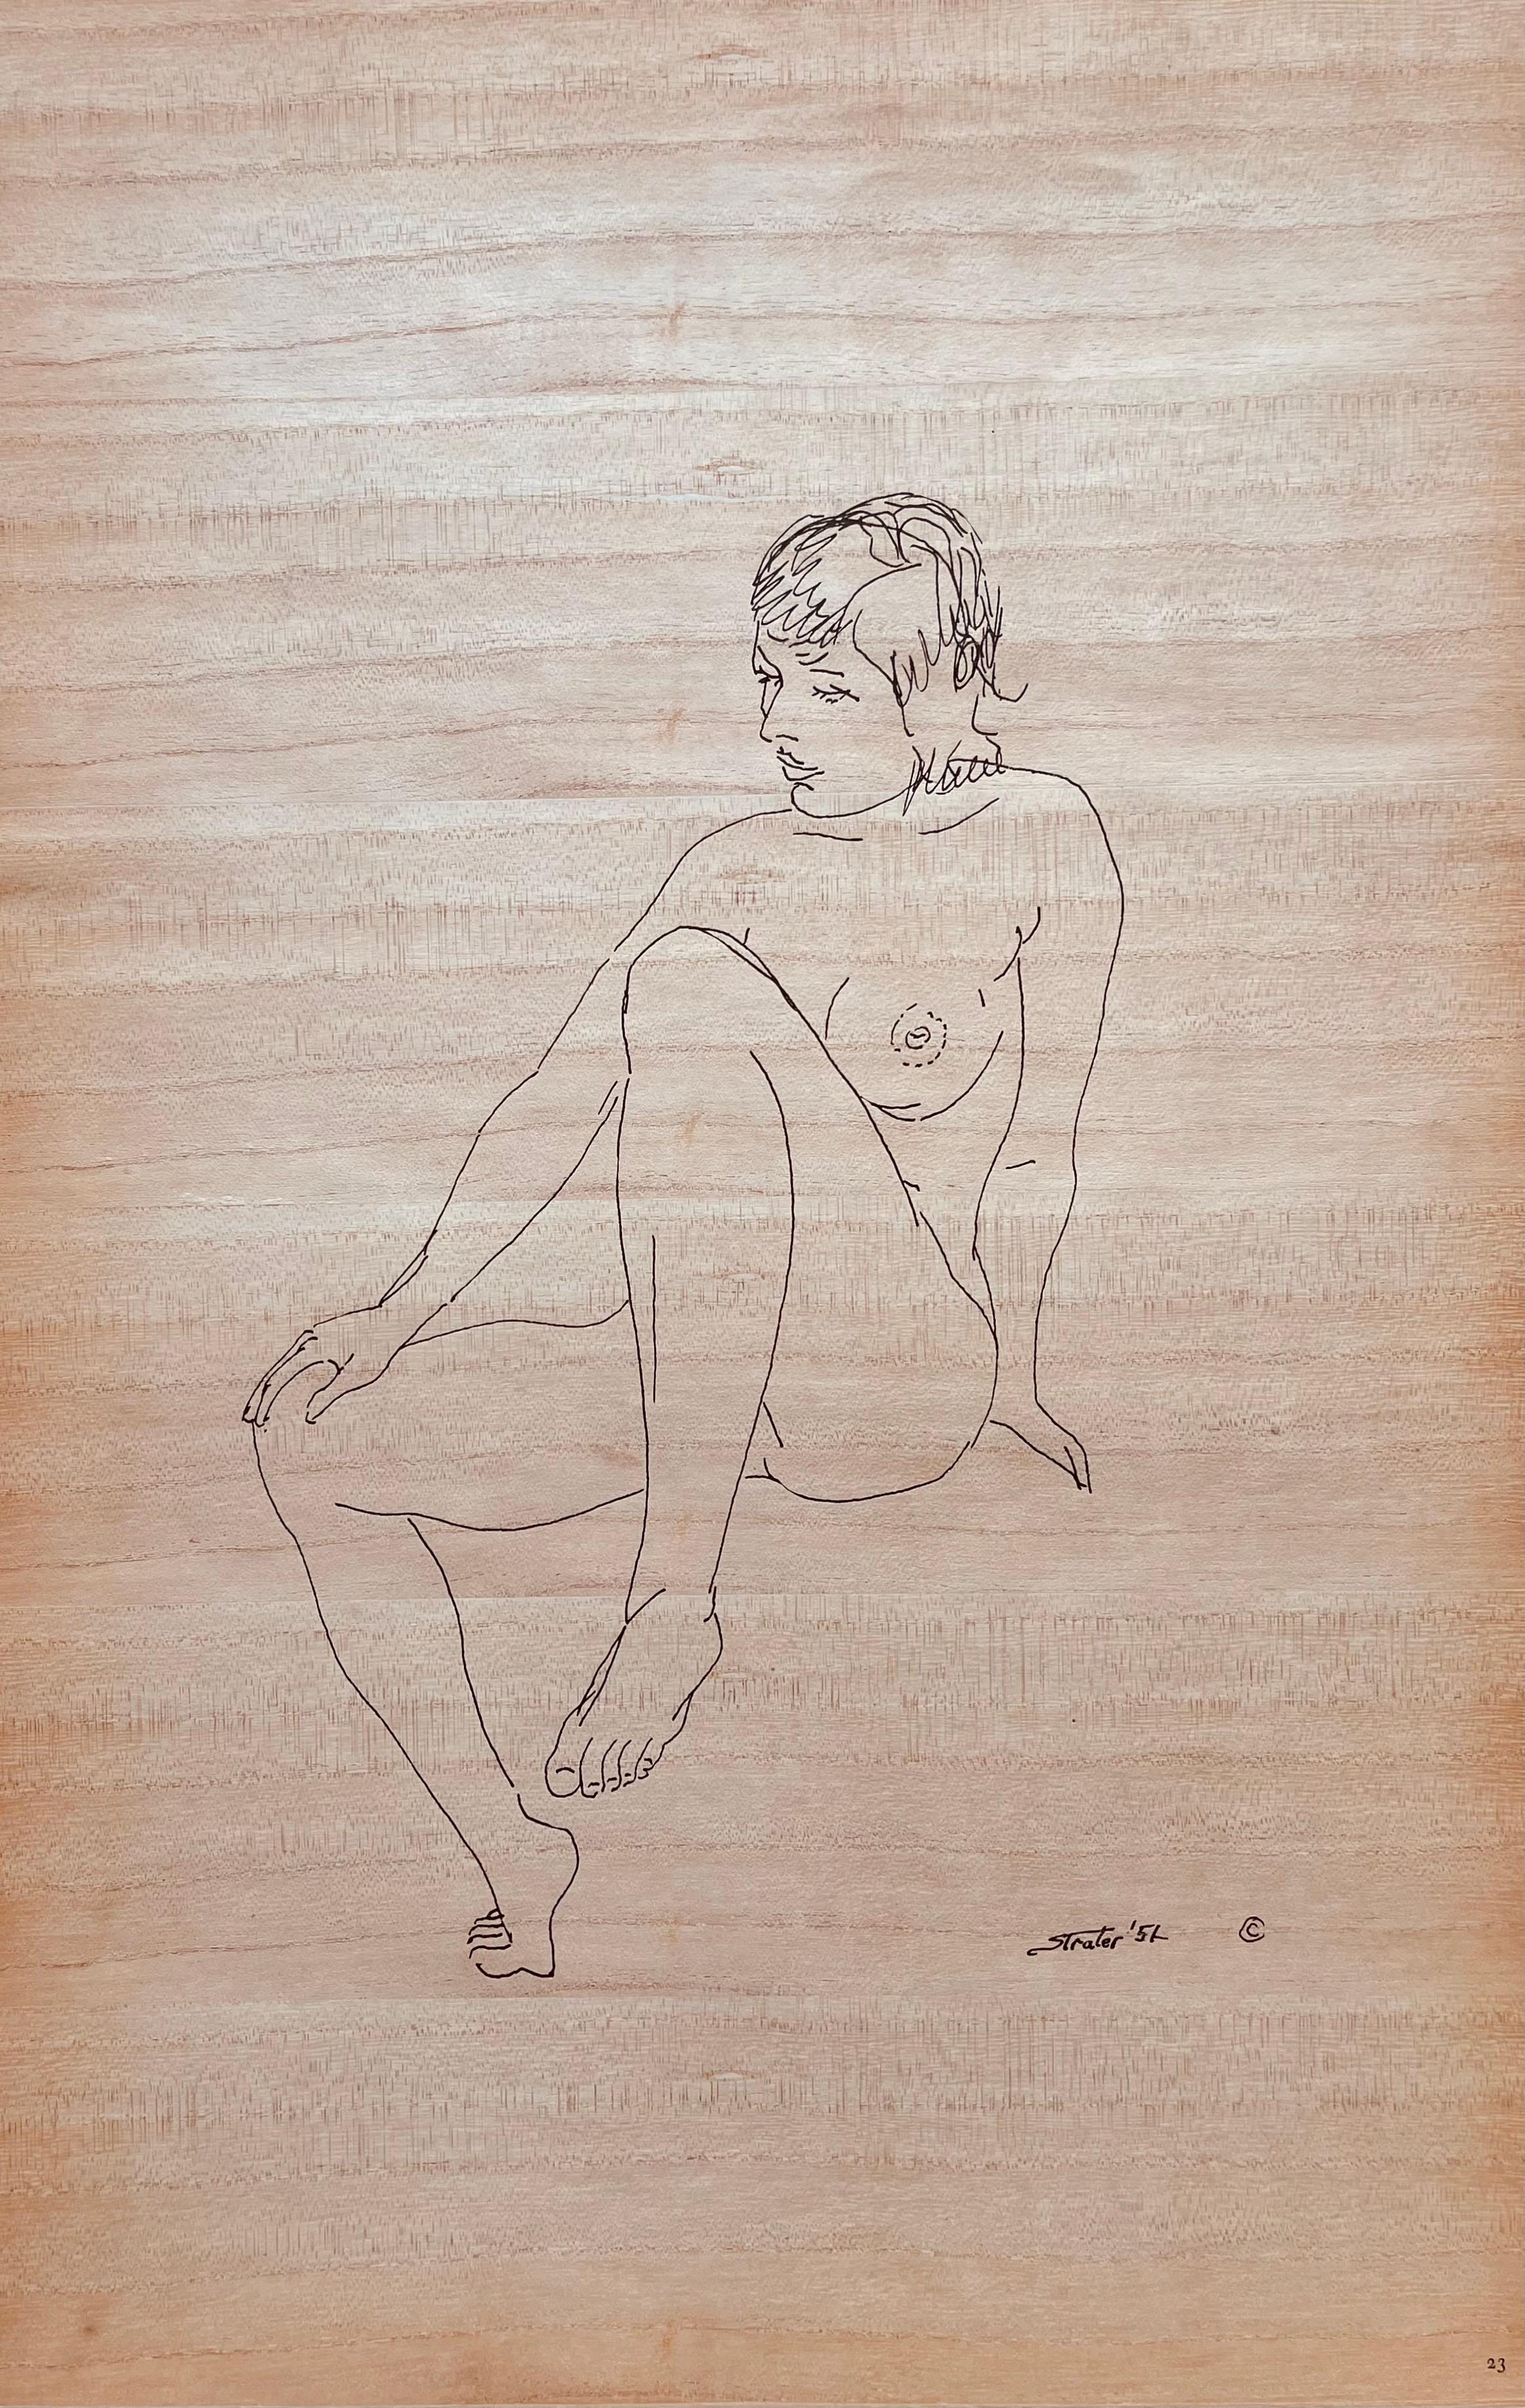 Original Edition Lithograph on wood veneer. Inscription: Signed in the plate and unnumbered, as issued. Good condition. Notes: From the folio, 24 Drawings by Henry Strater, 1958. Published by Henry Strater, Ogunquit, Maine; printed by The Anthoensen